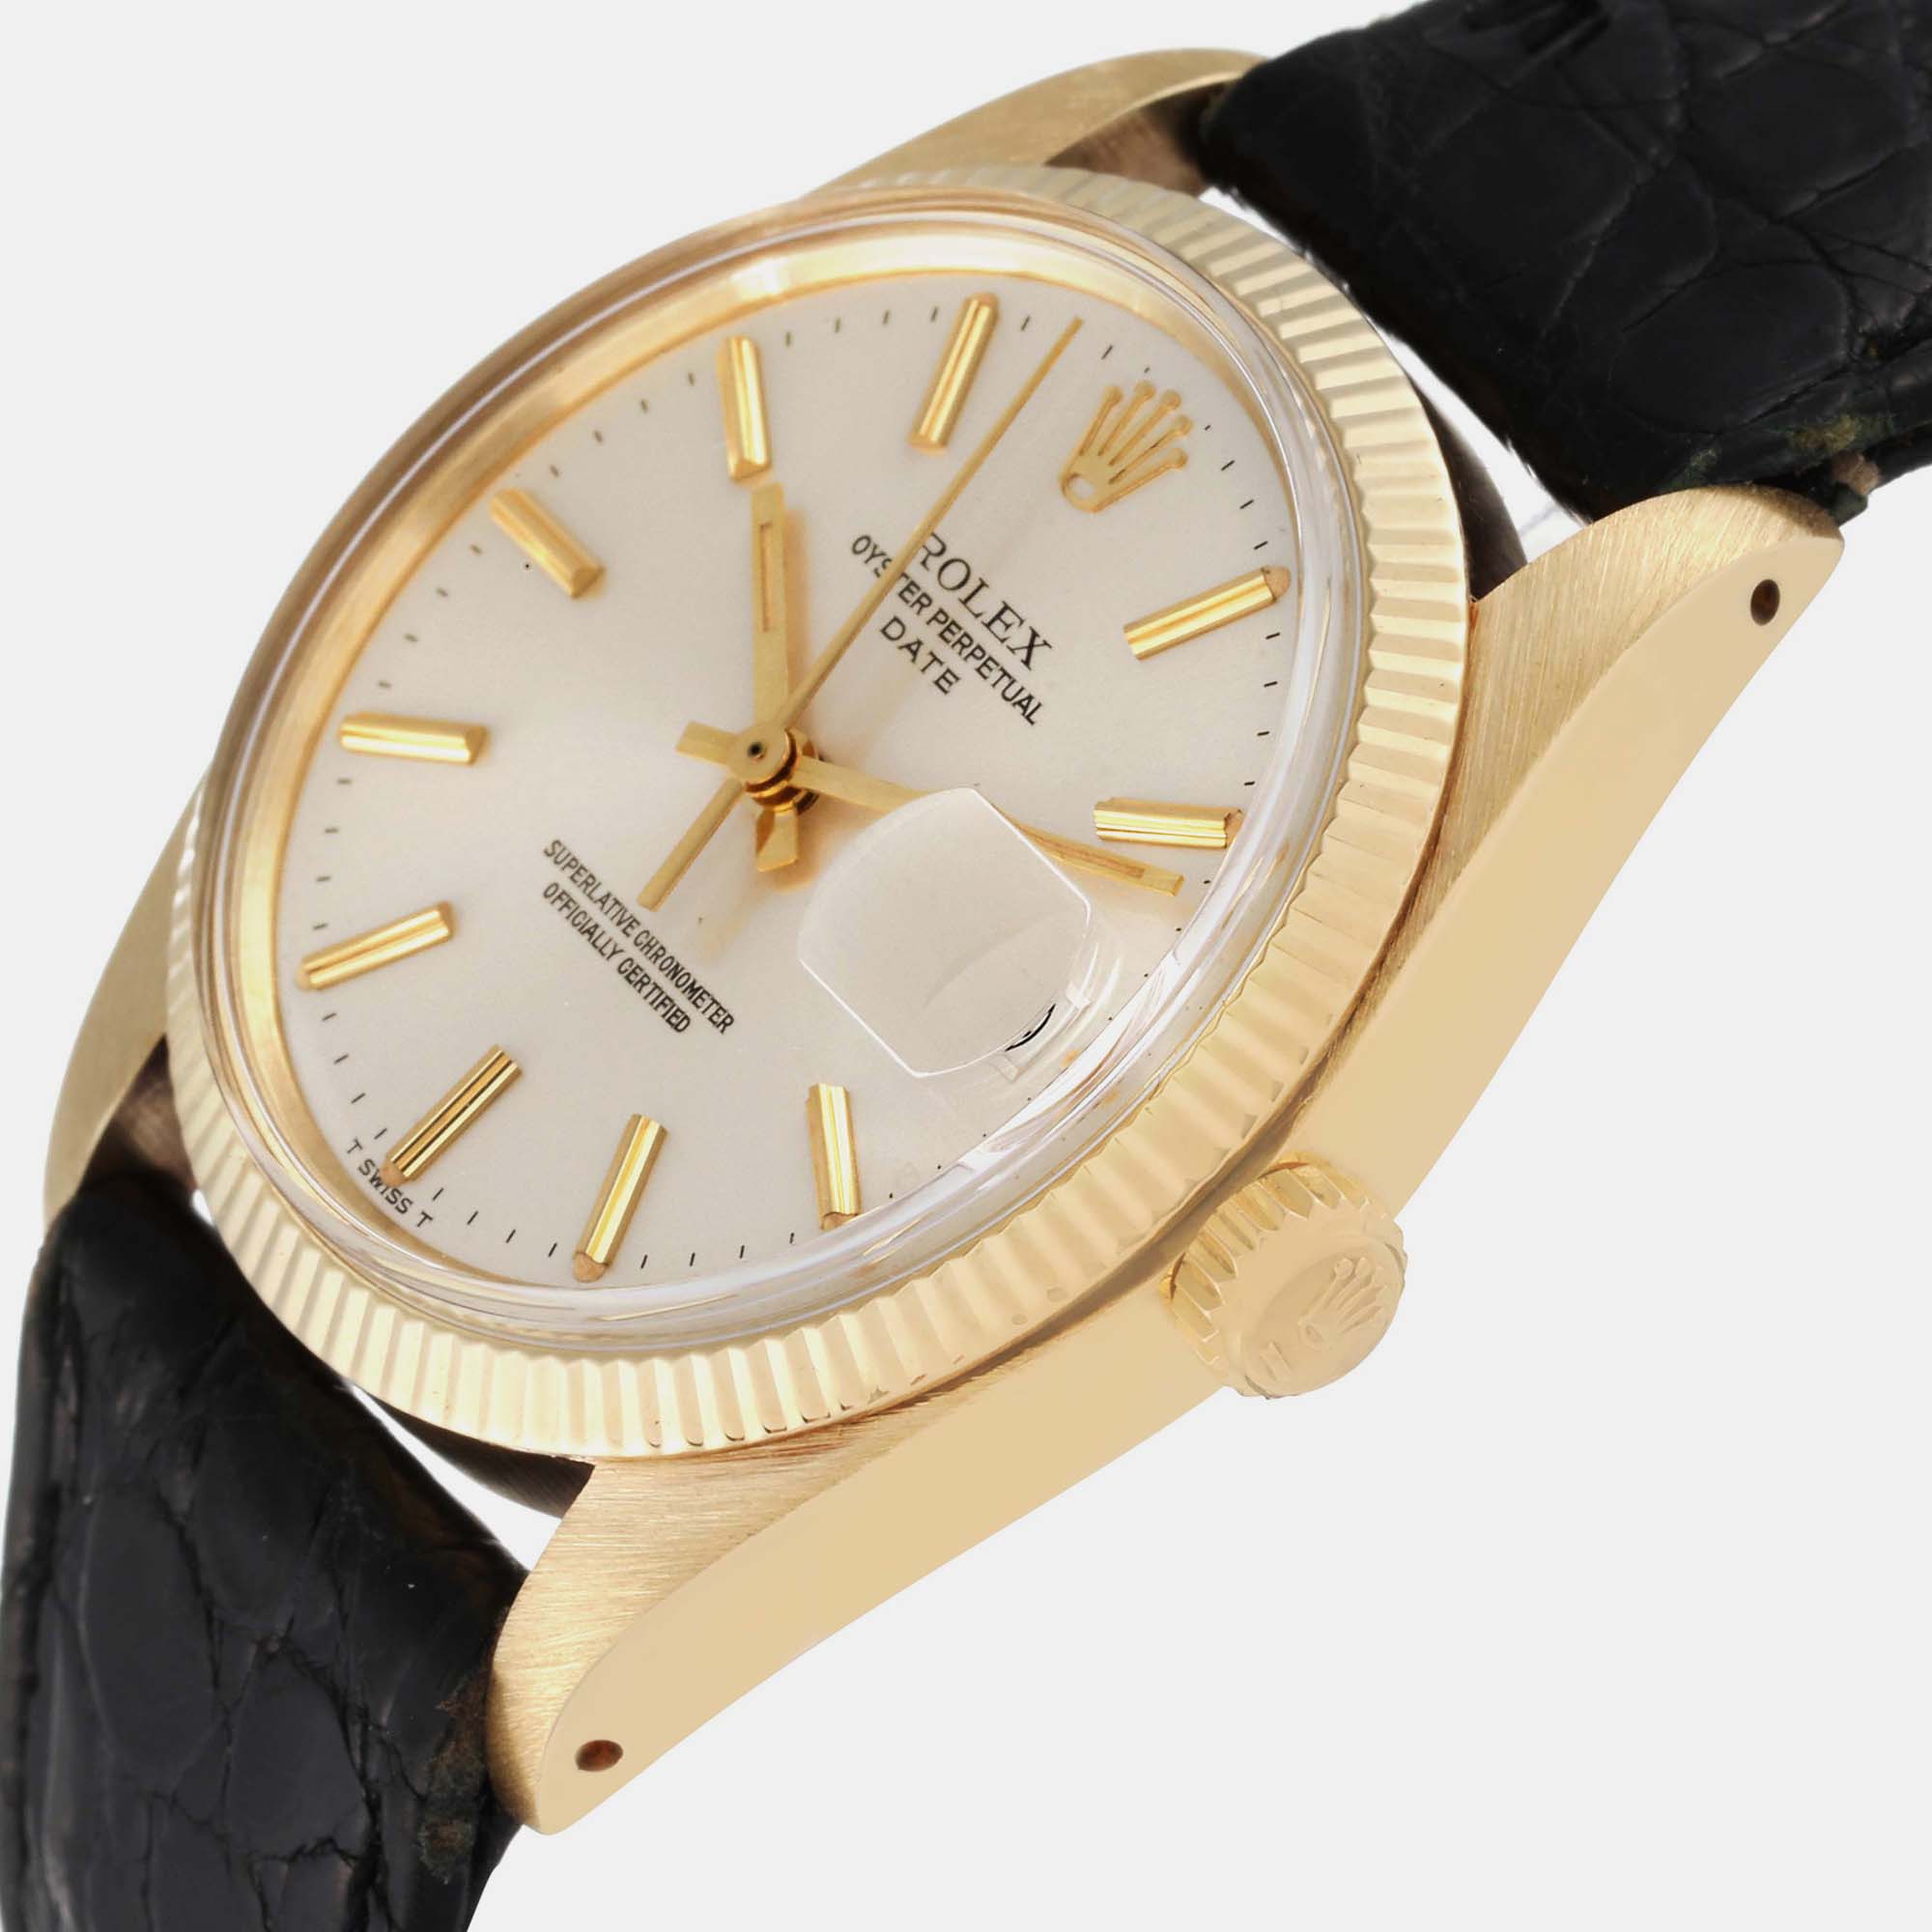 

Rolex Date Yellow Gold Champagne Dial Leather Strap Vintage Men's Watch 1503 34 mm, Grey